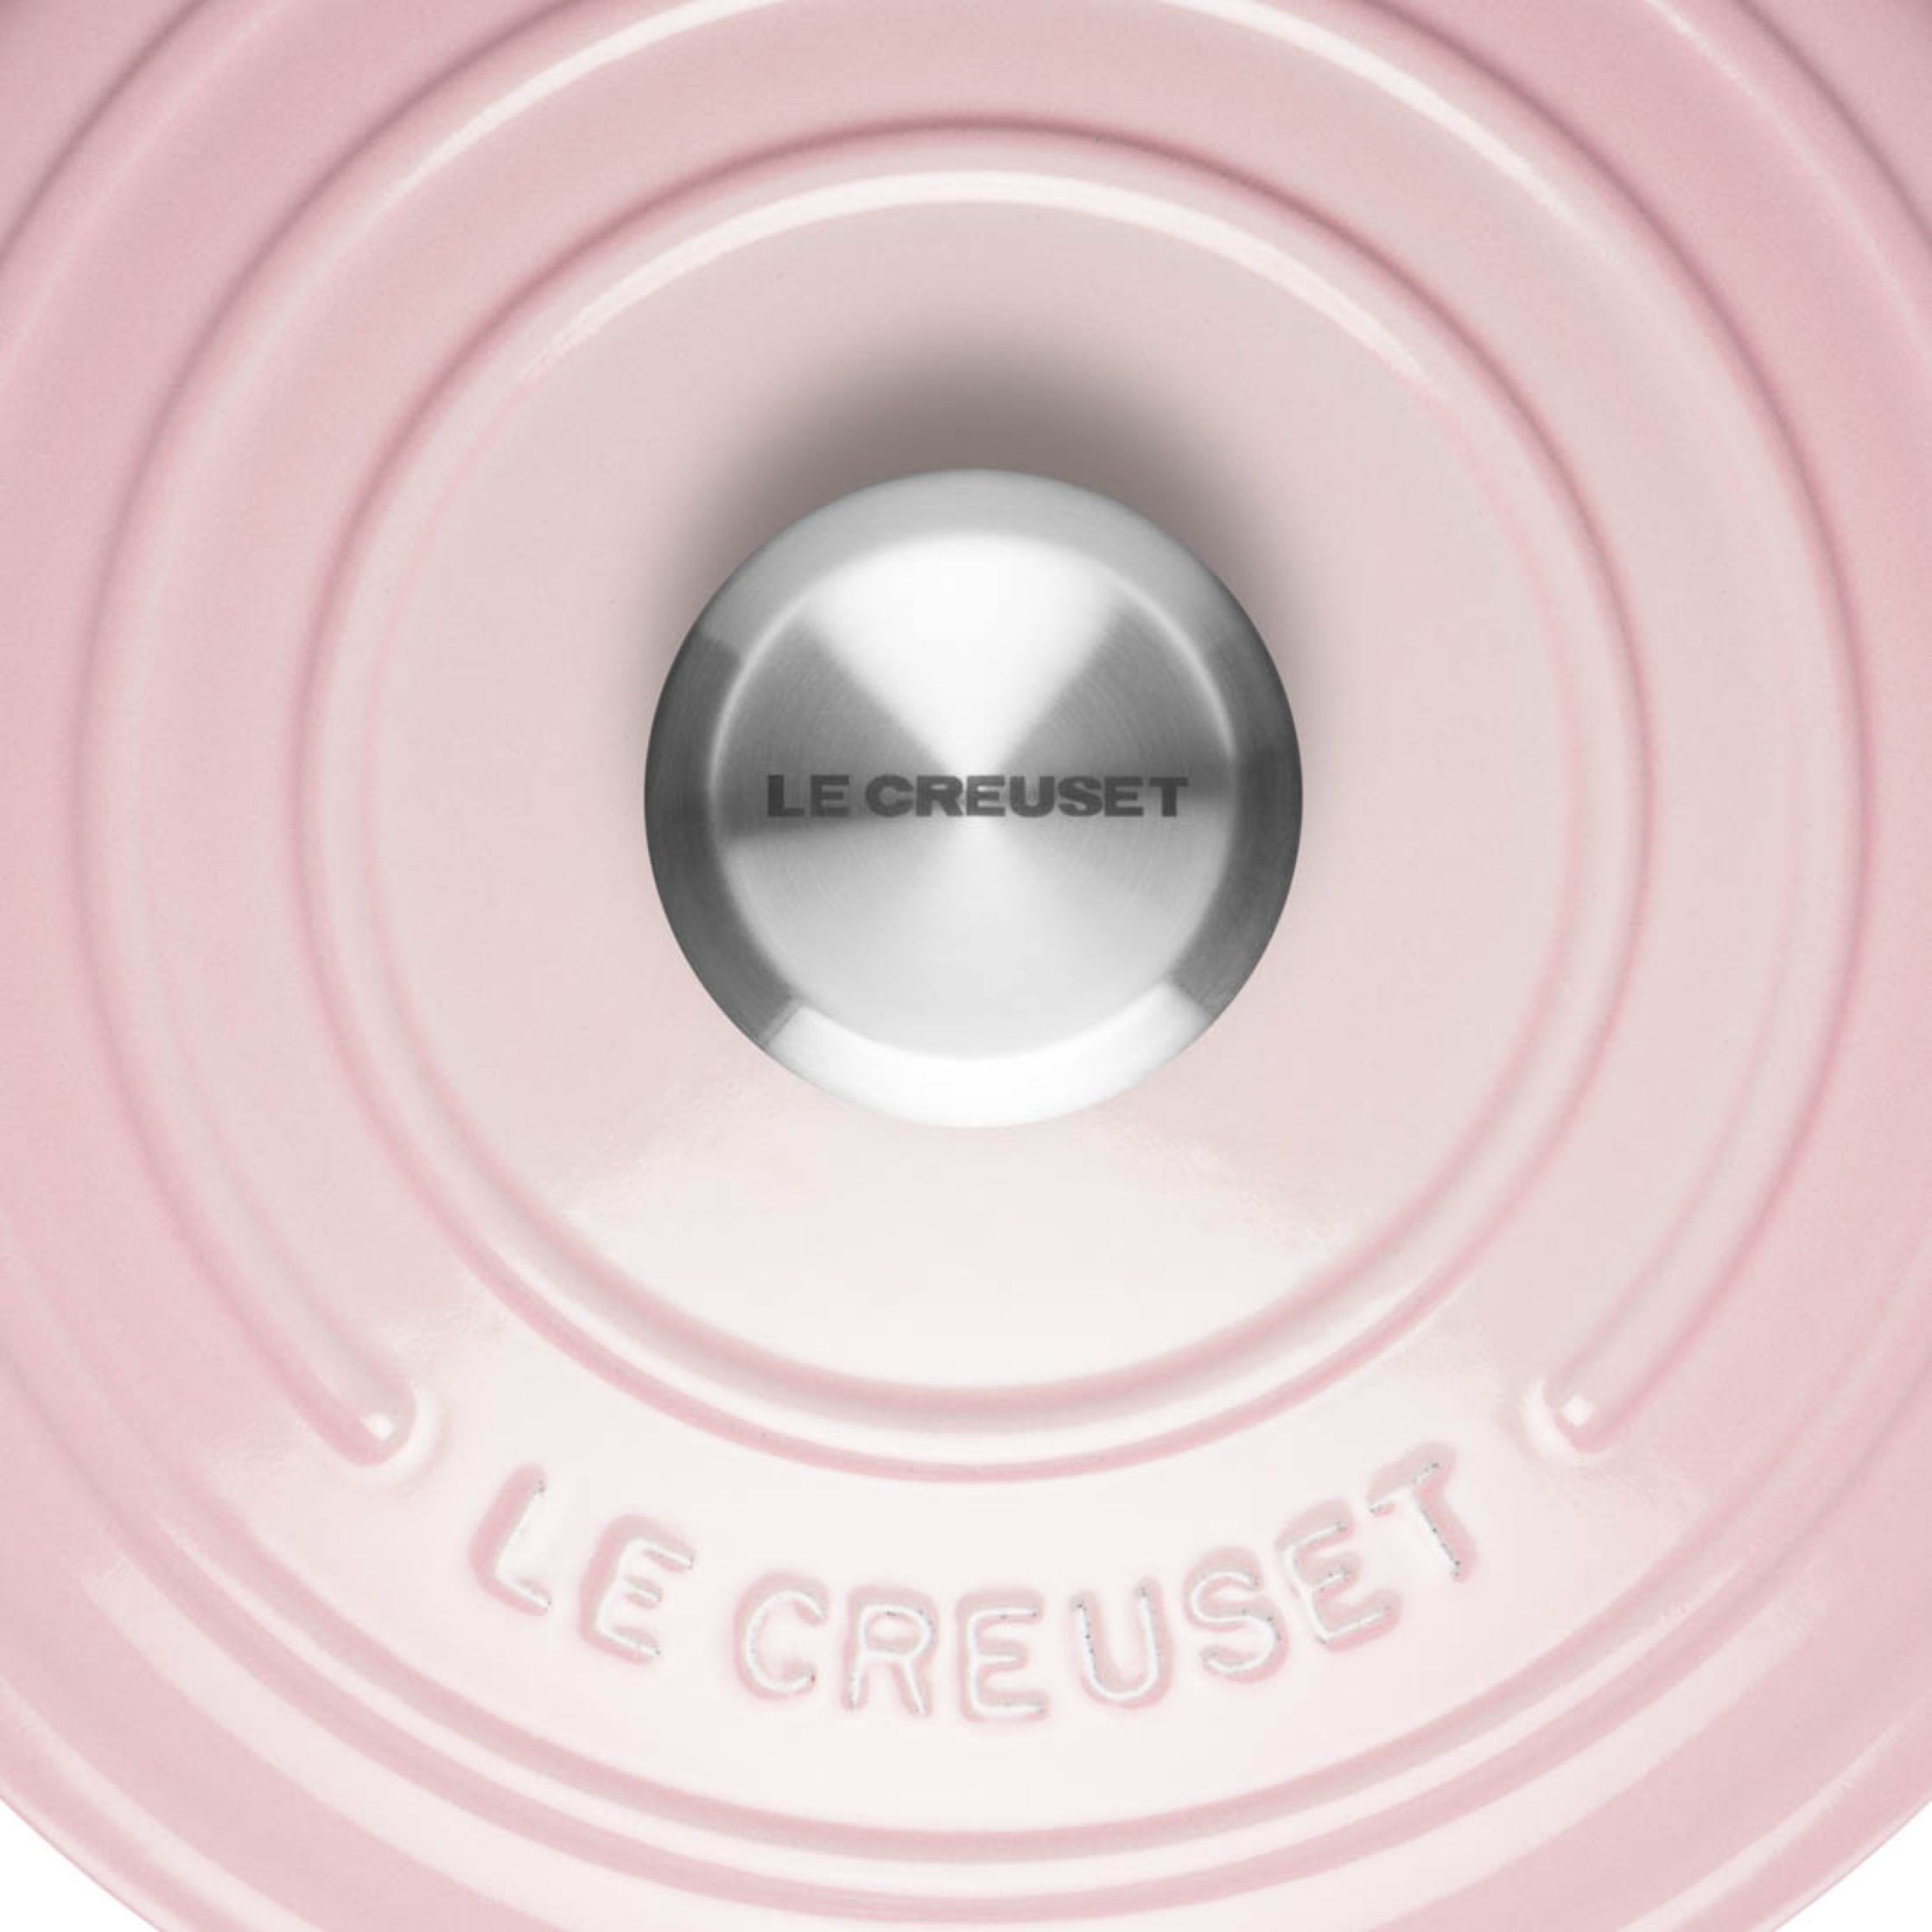 Le Creuset Signature Round Roaster 24 Cm, Shell Pink